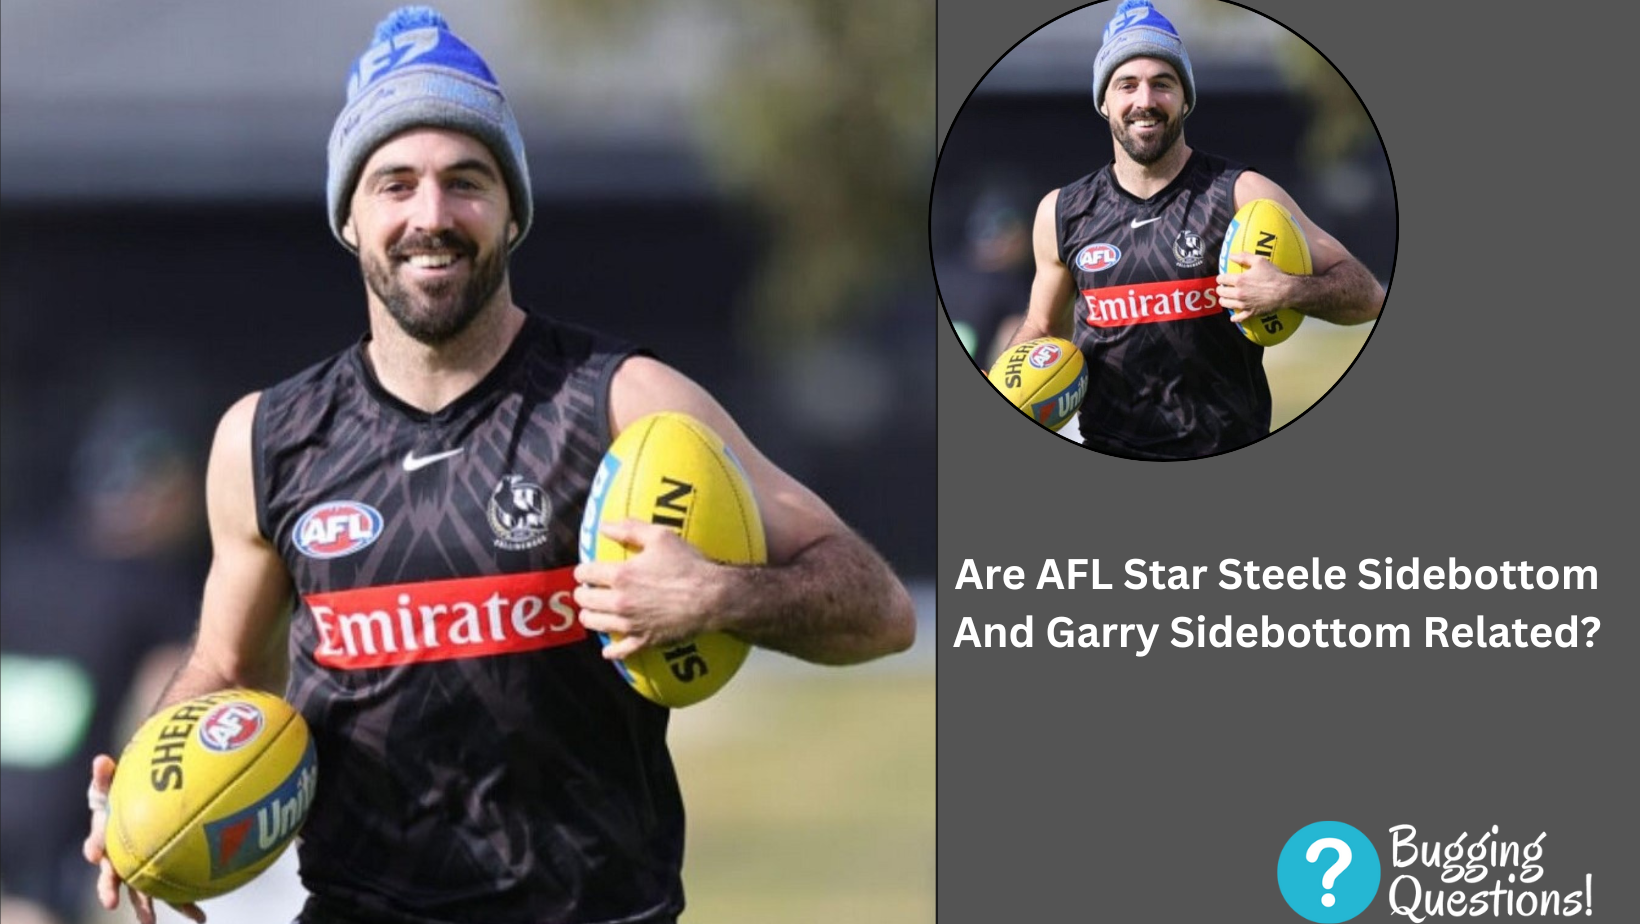 Are AFL Star Steele Sidebottom And Garry Sidebottom Related?